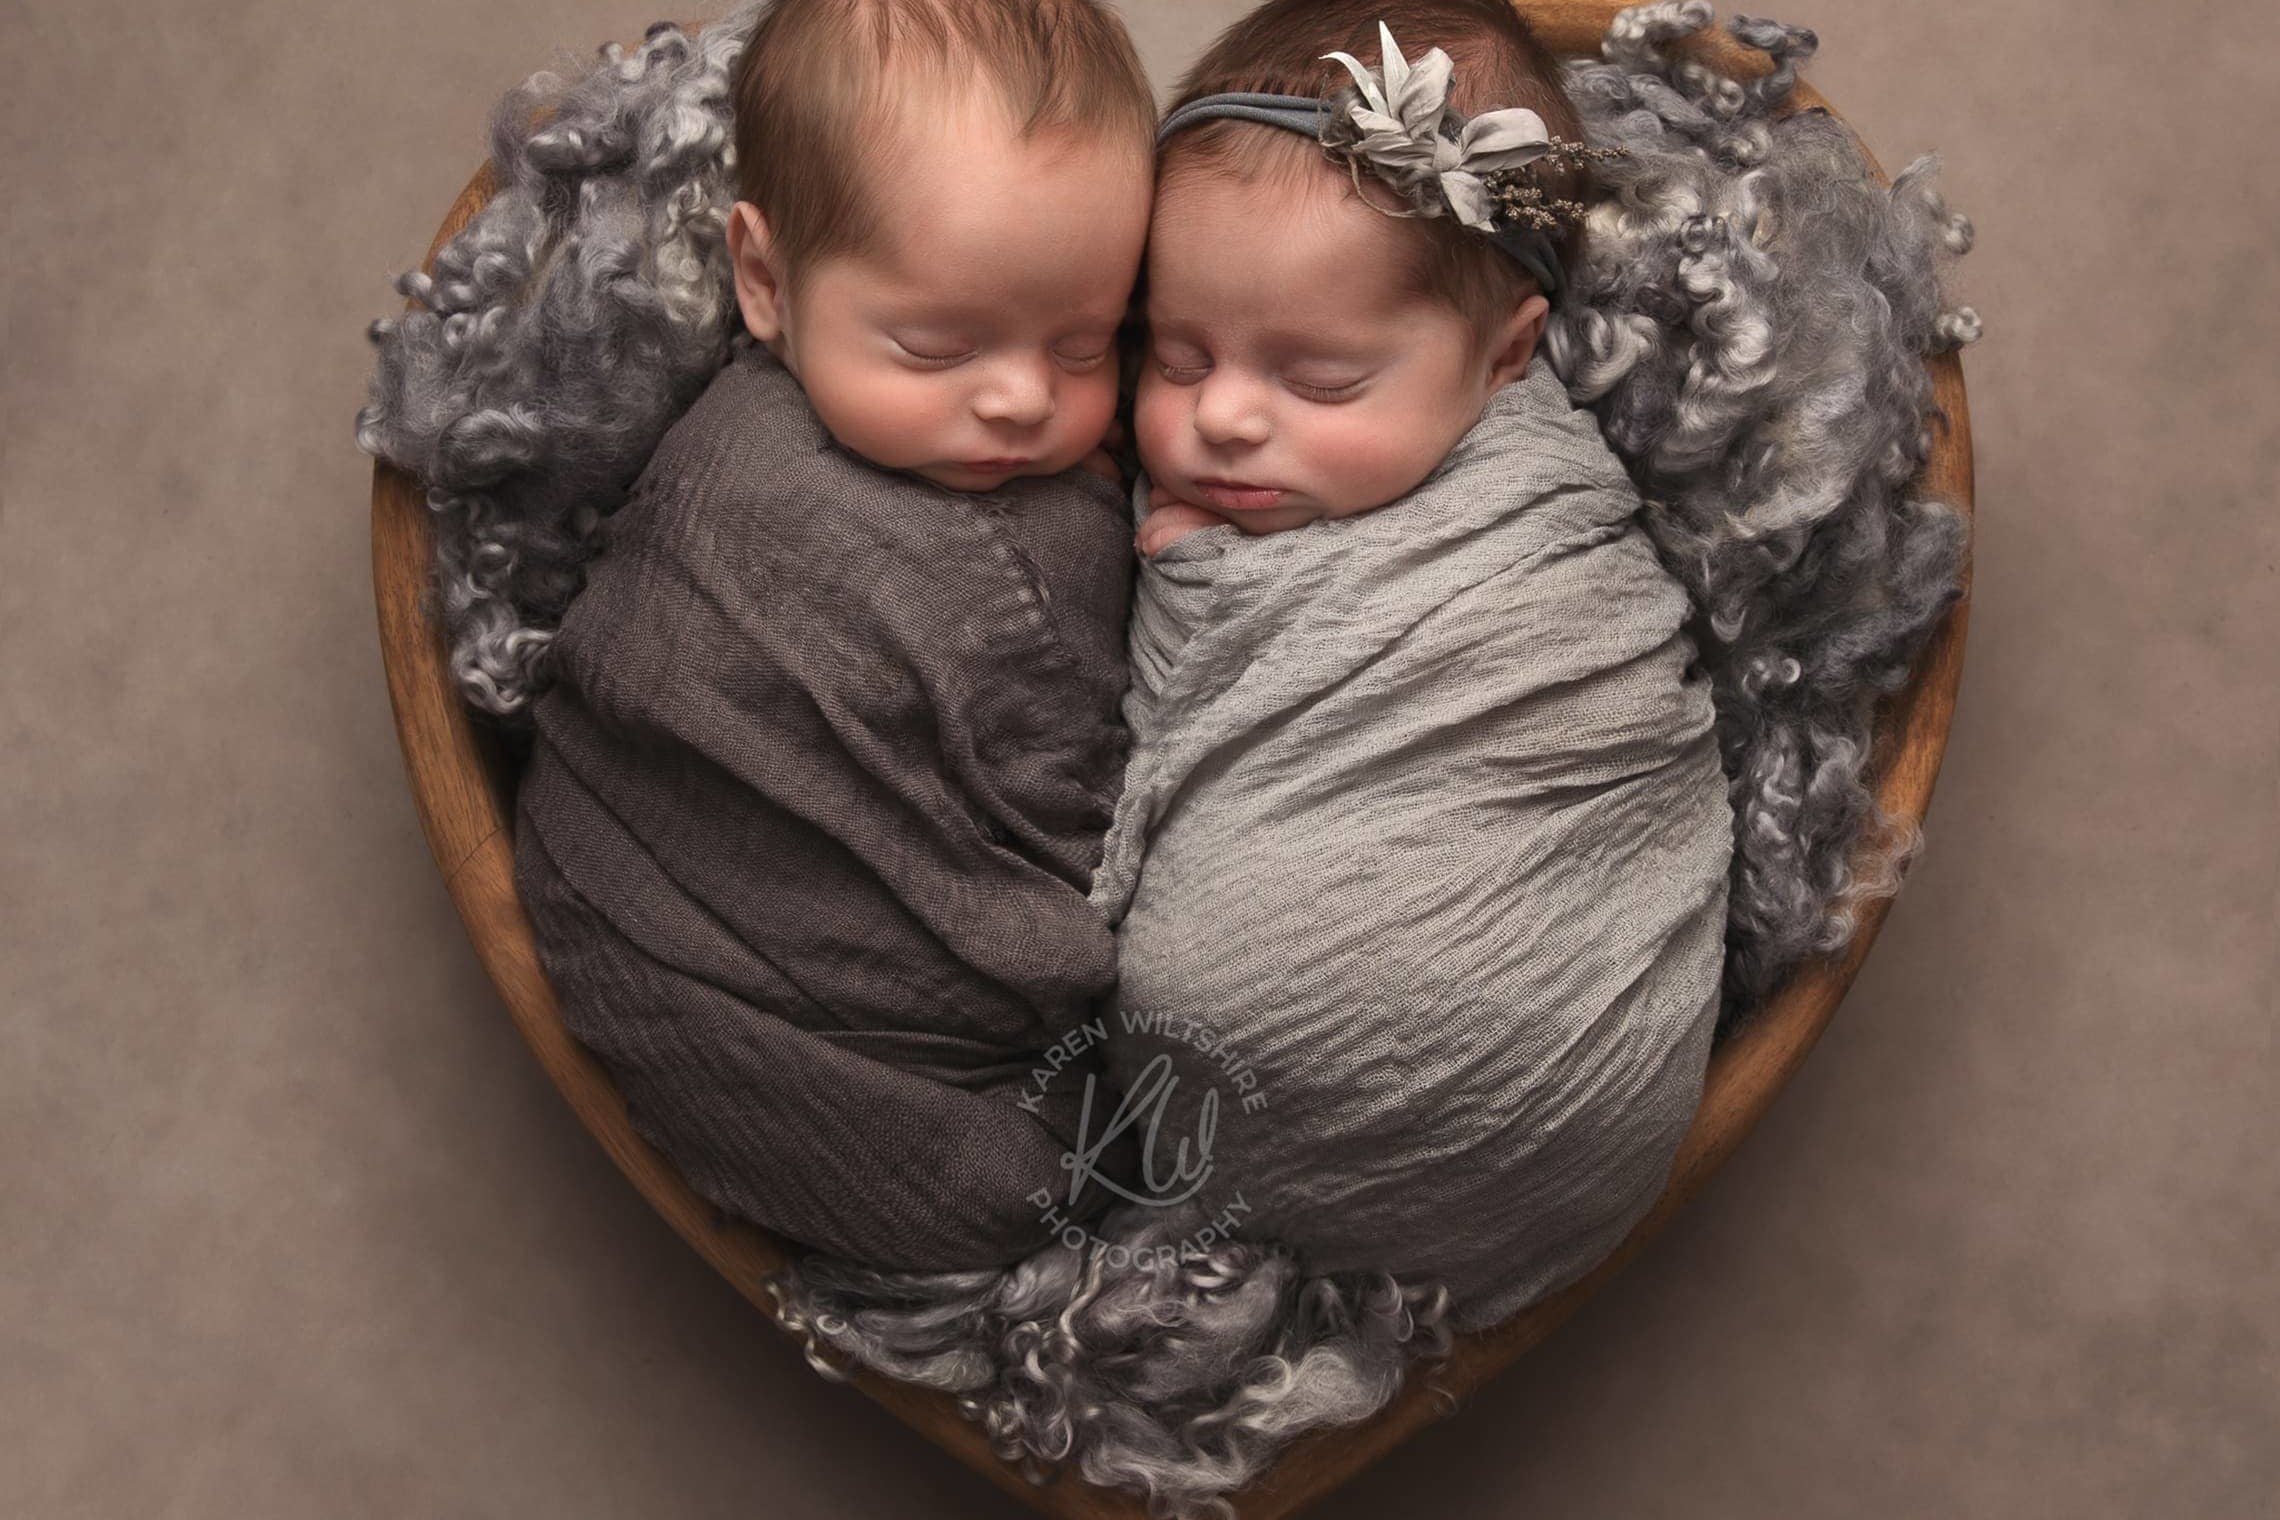 Boy and girl baby twins wrapped together sleeping